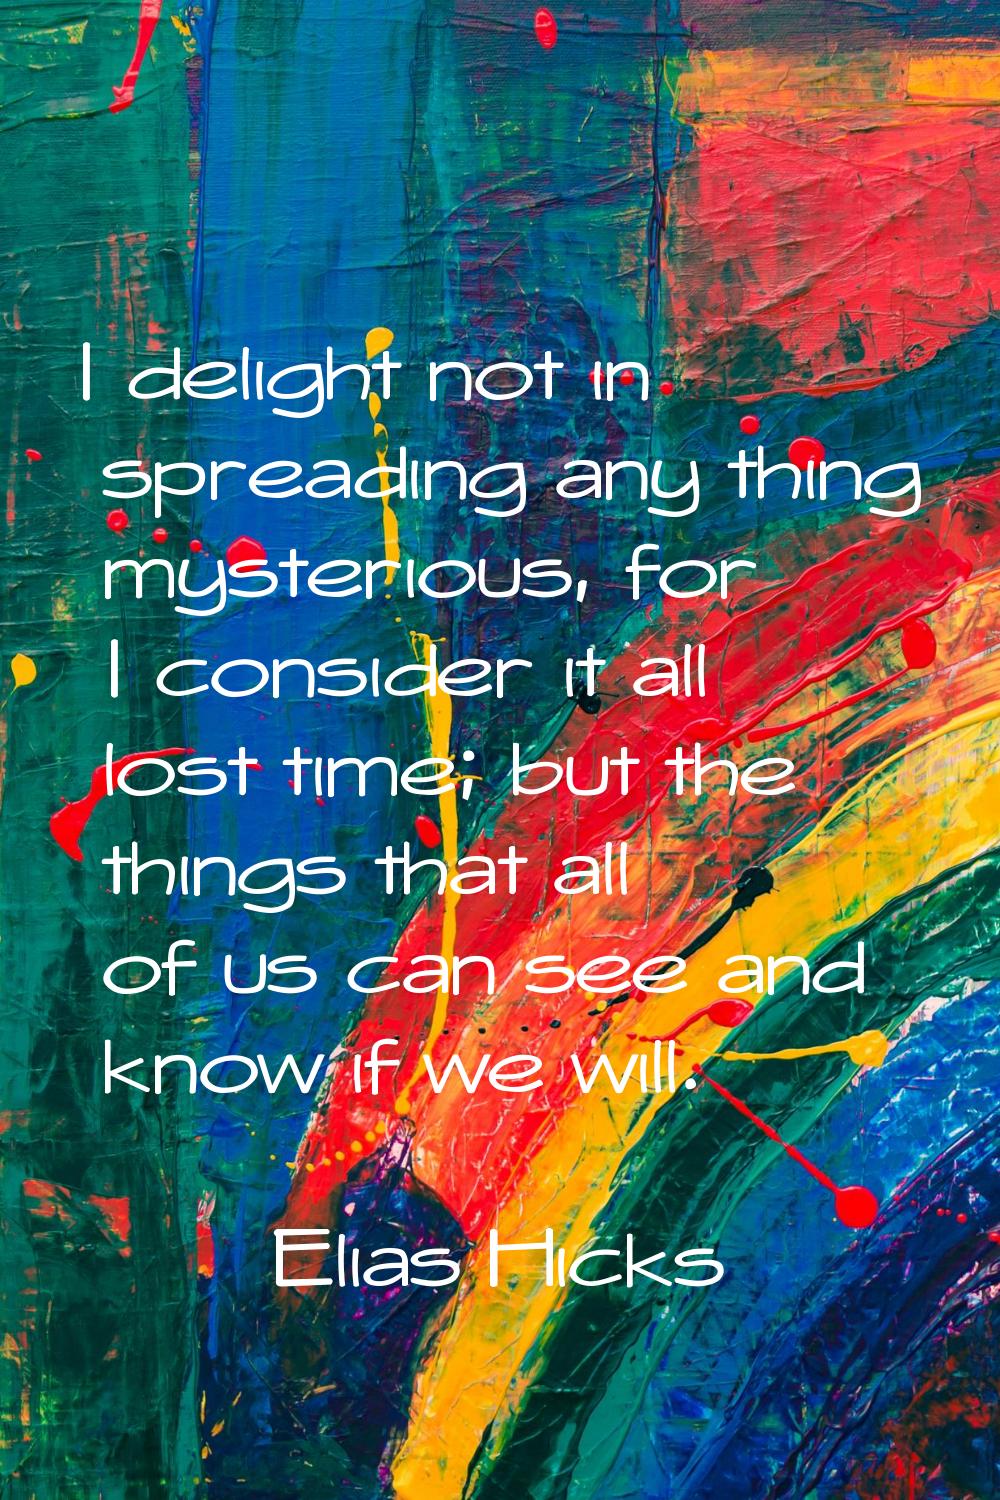 I delight not in spreading any thing mysterious, for I consider it all lost time; but the things th